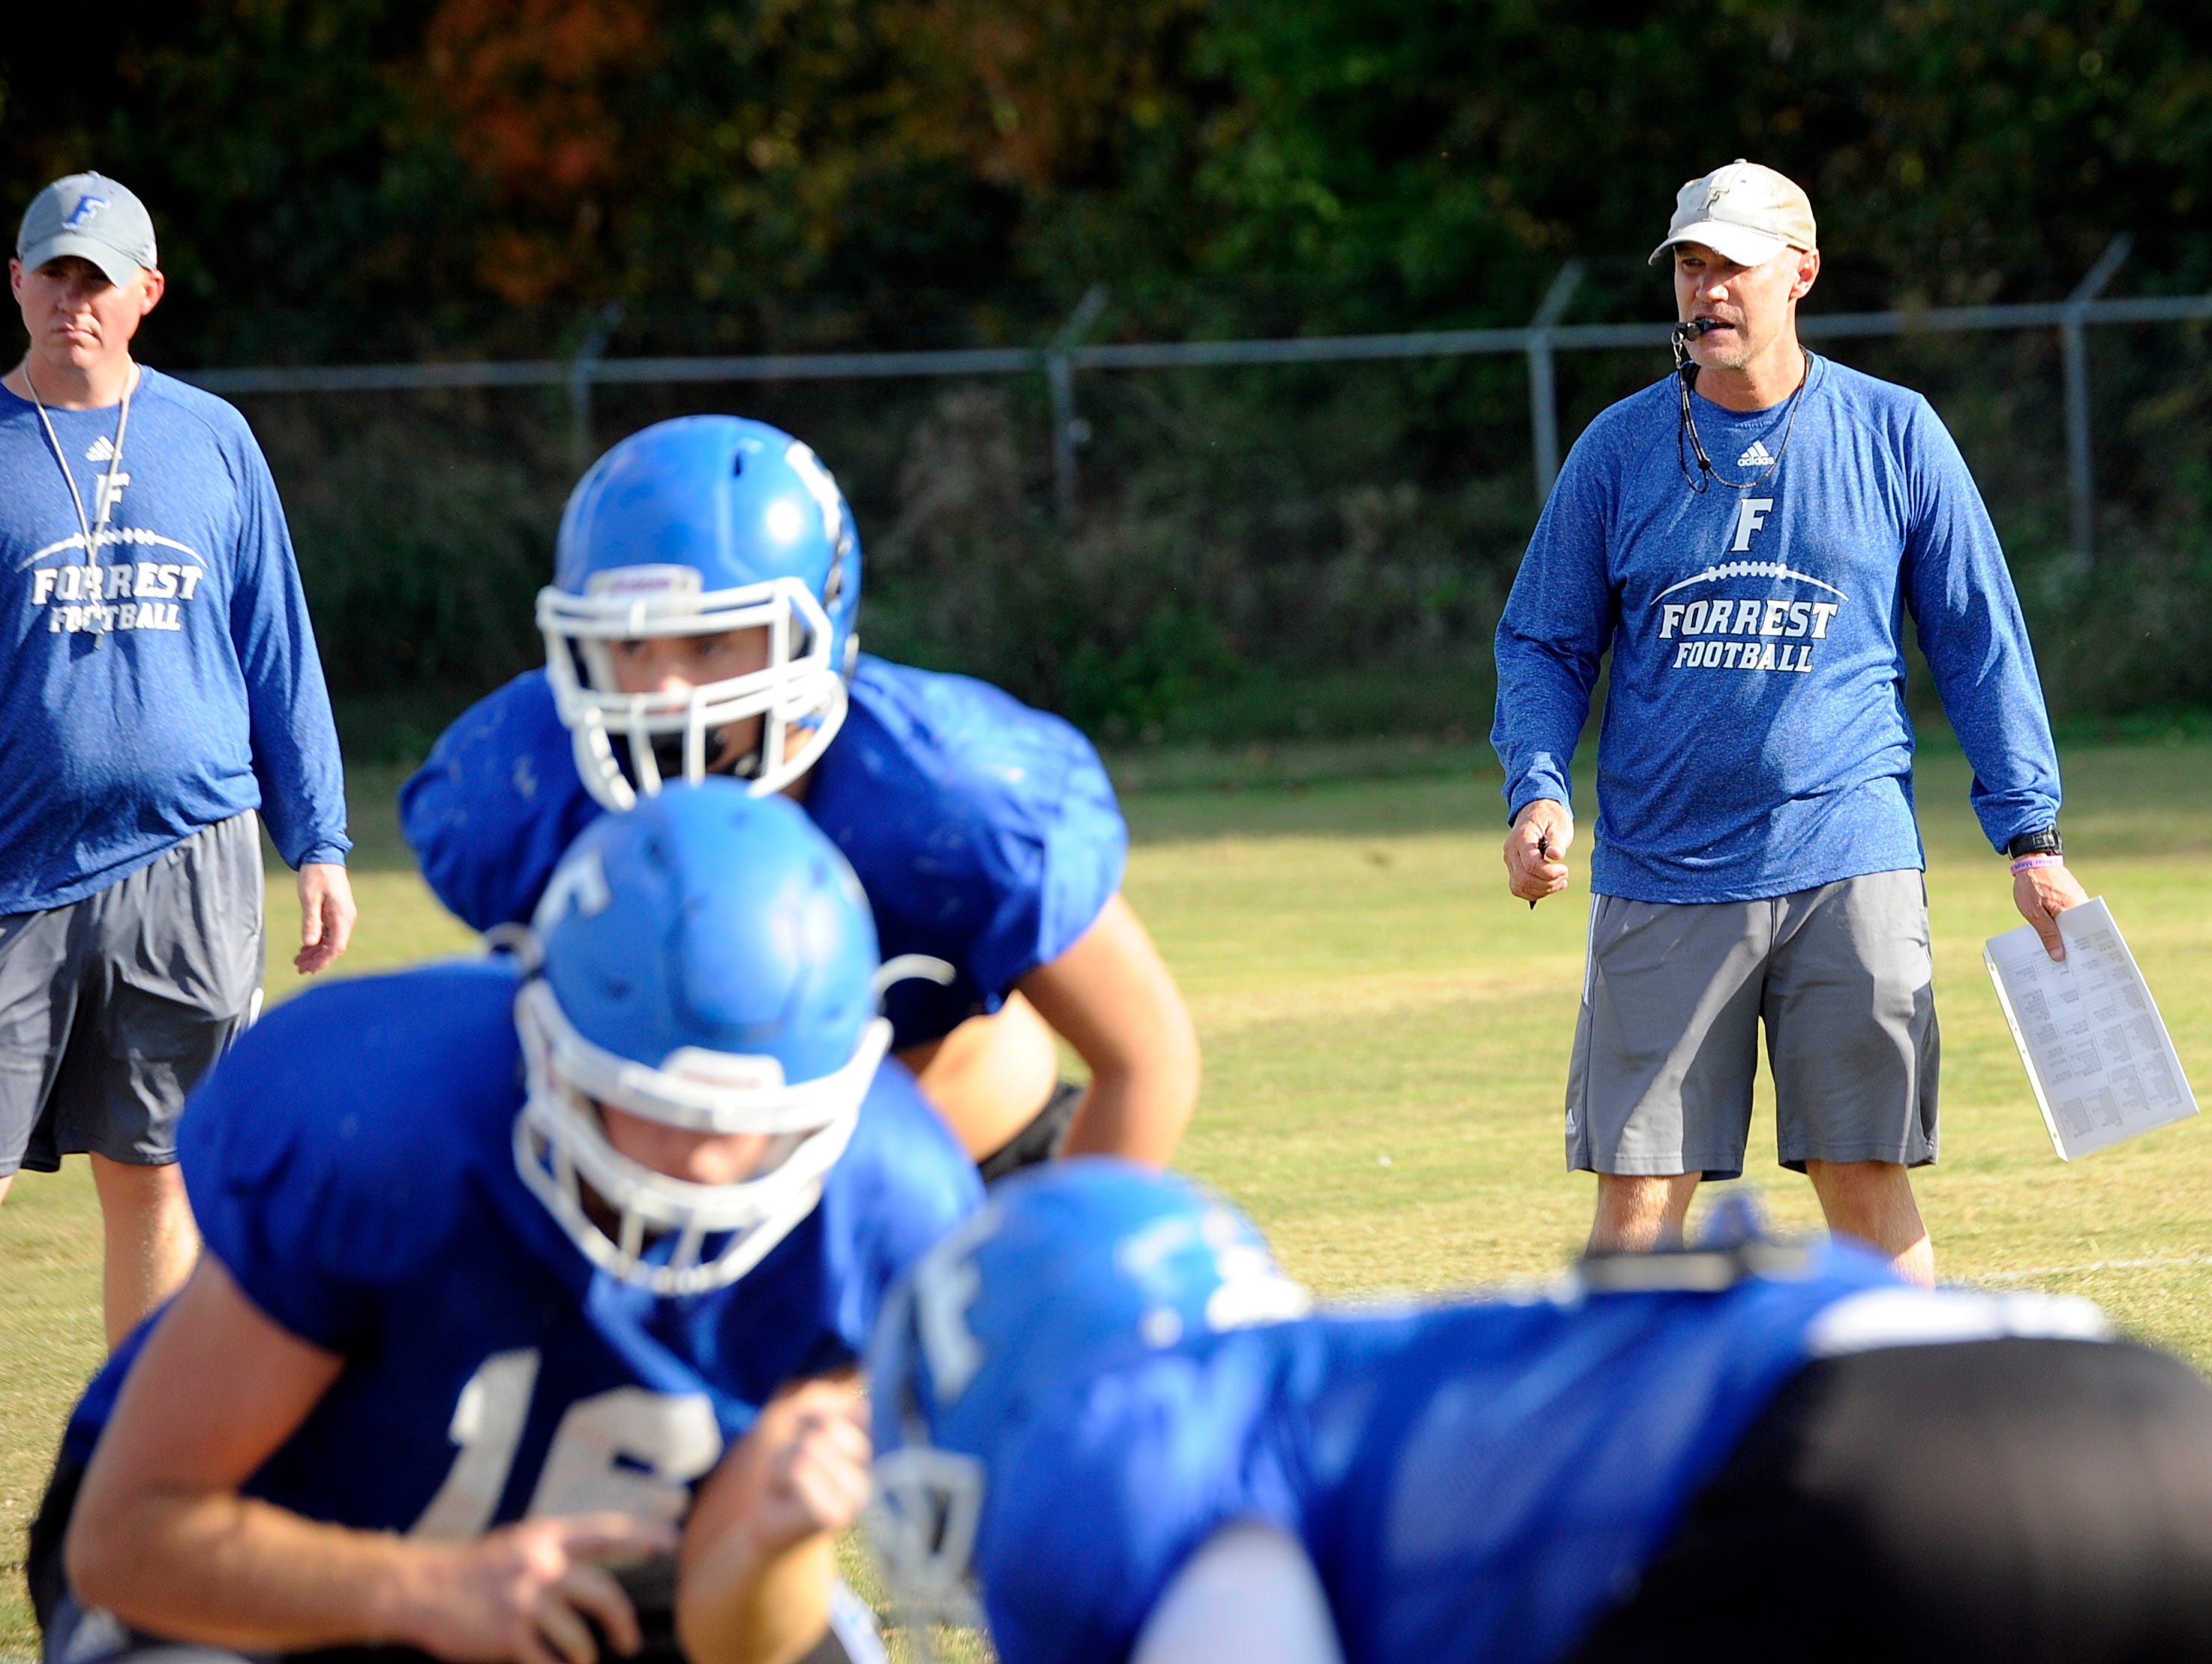 Forrest head coach Brent Johns (at right) looks on during Monday's practice.